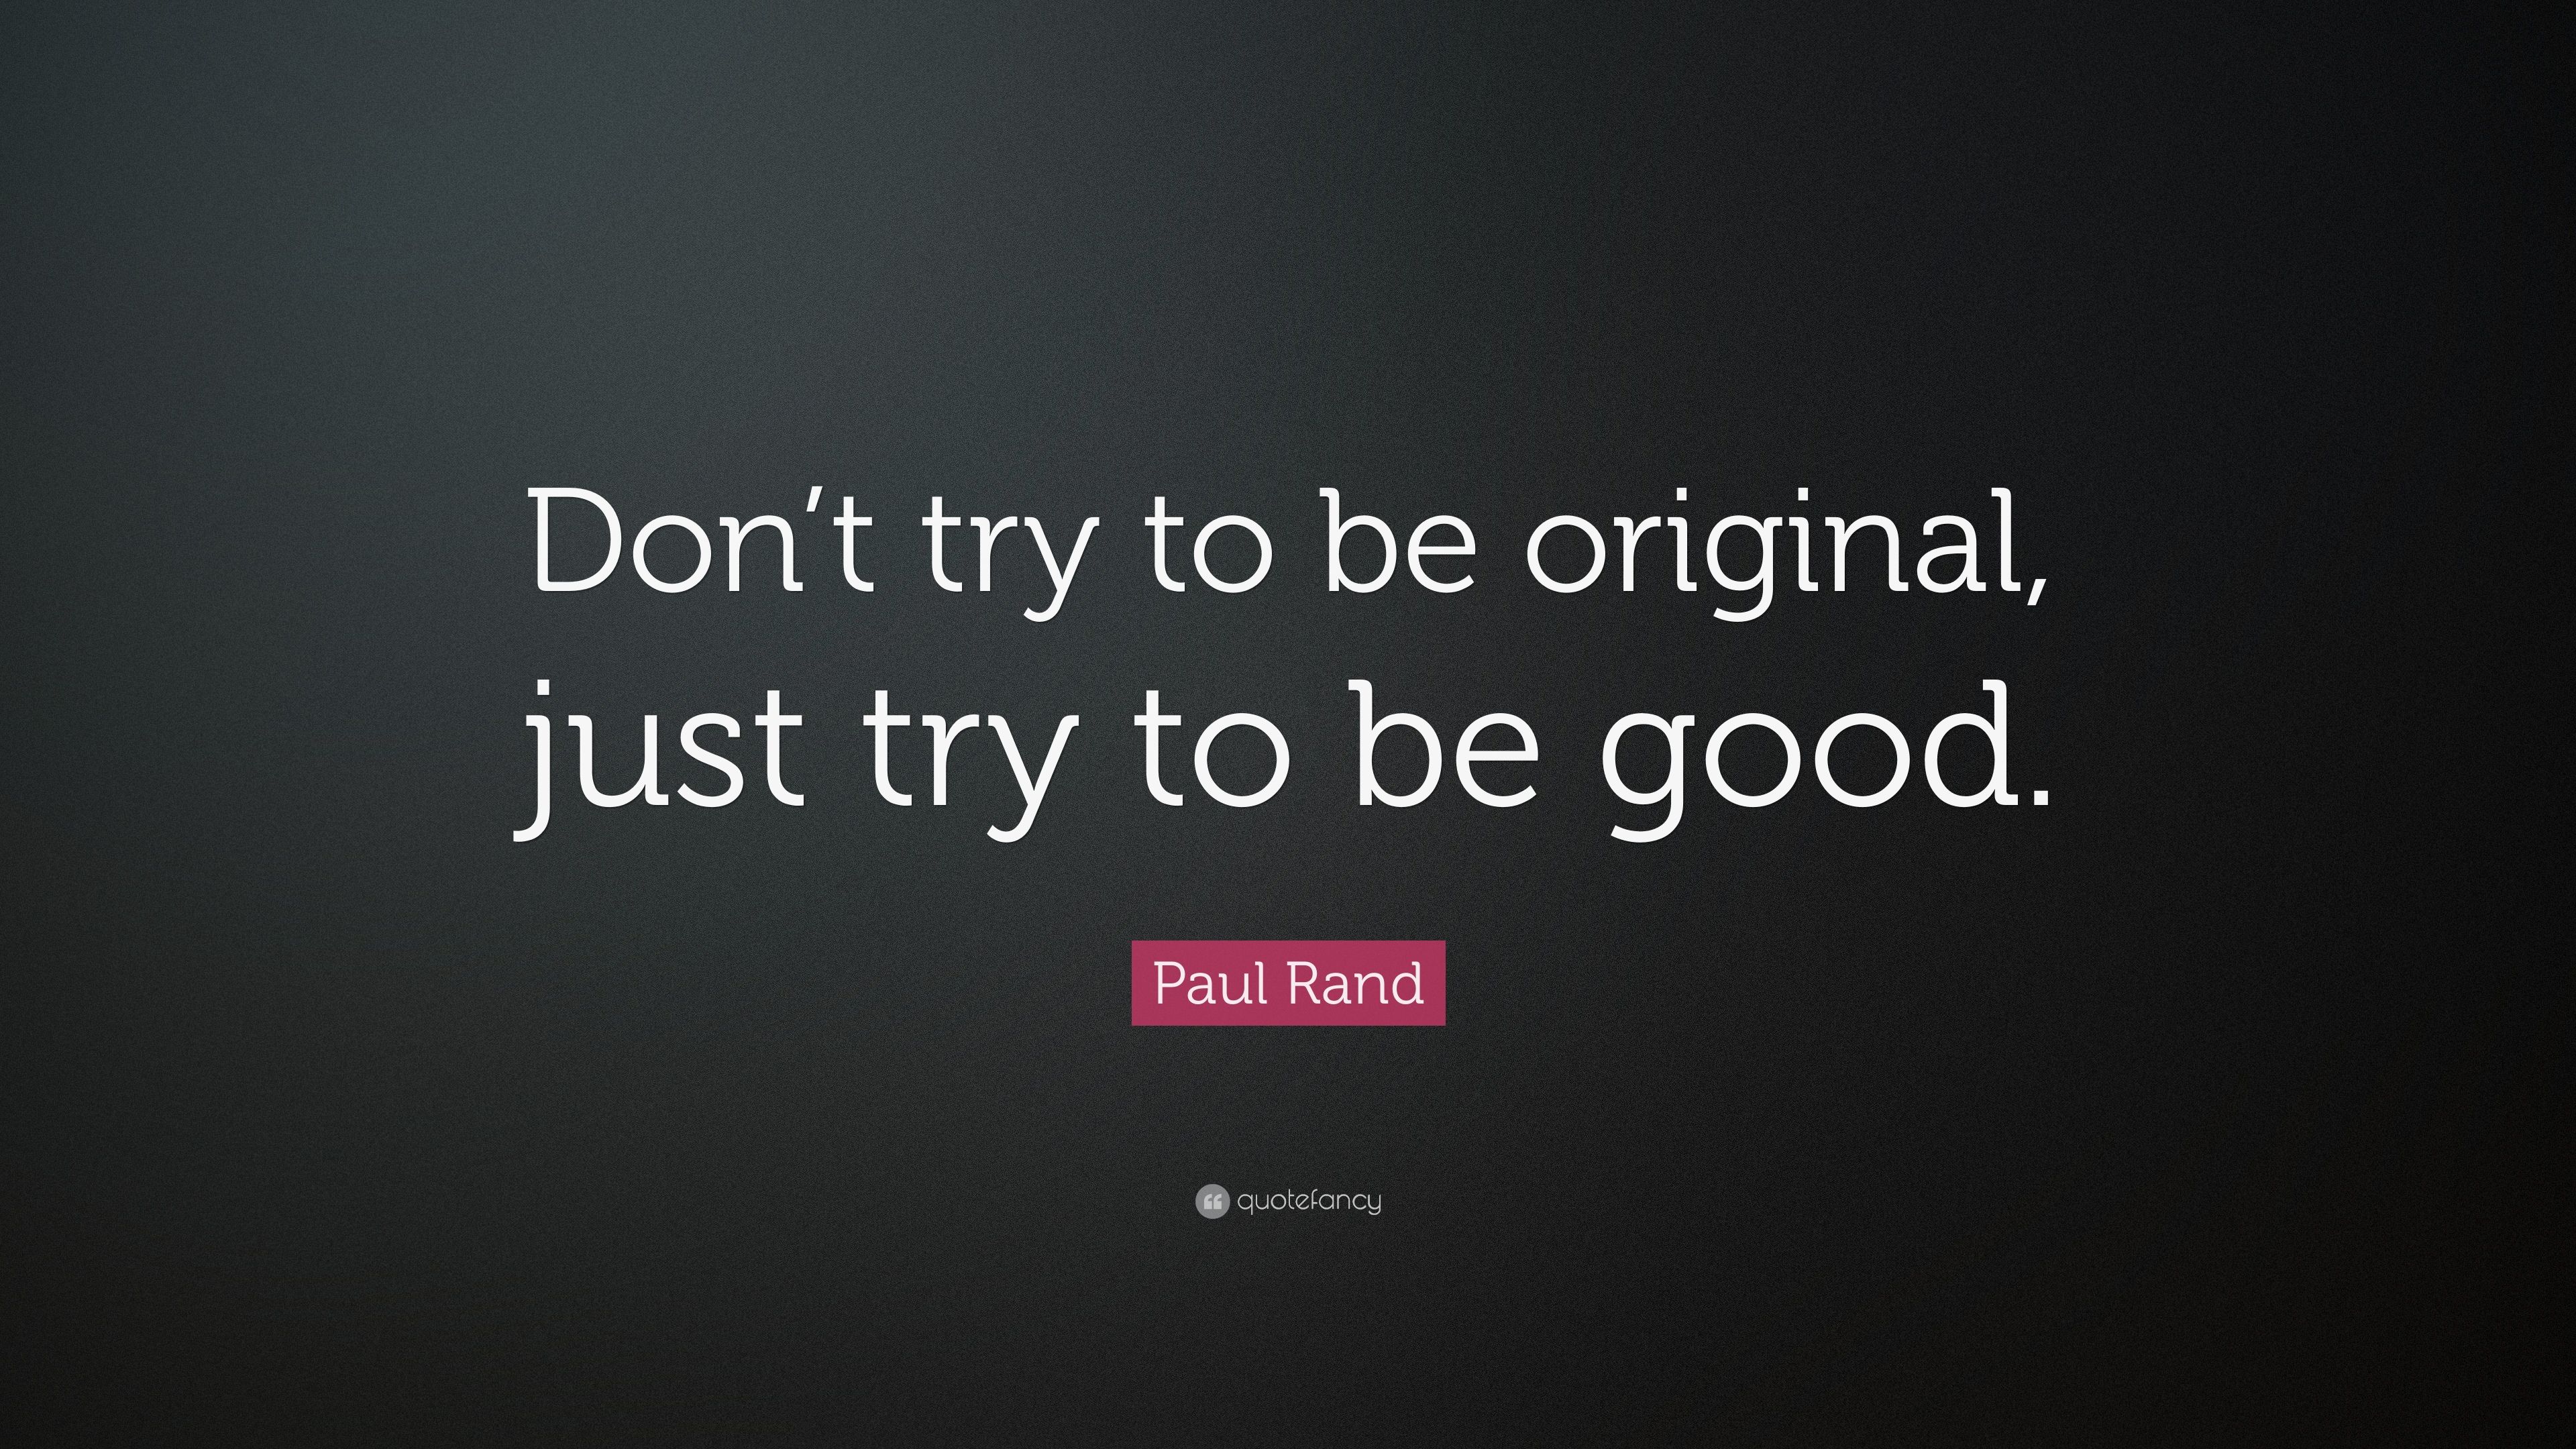 Paul Rand Quote: “Don't try to be original, just try to be good